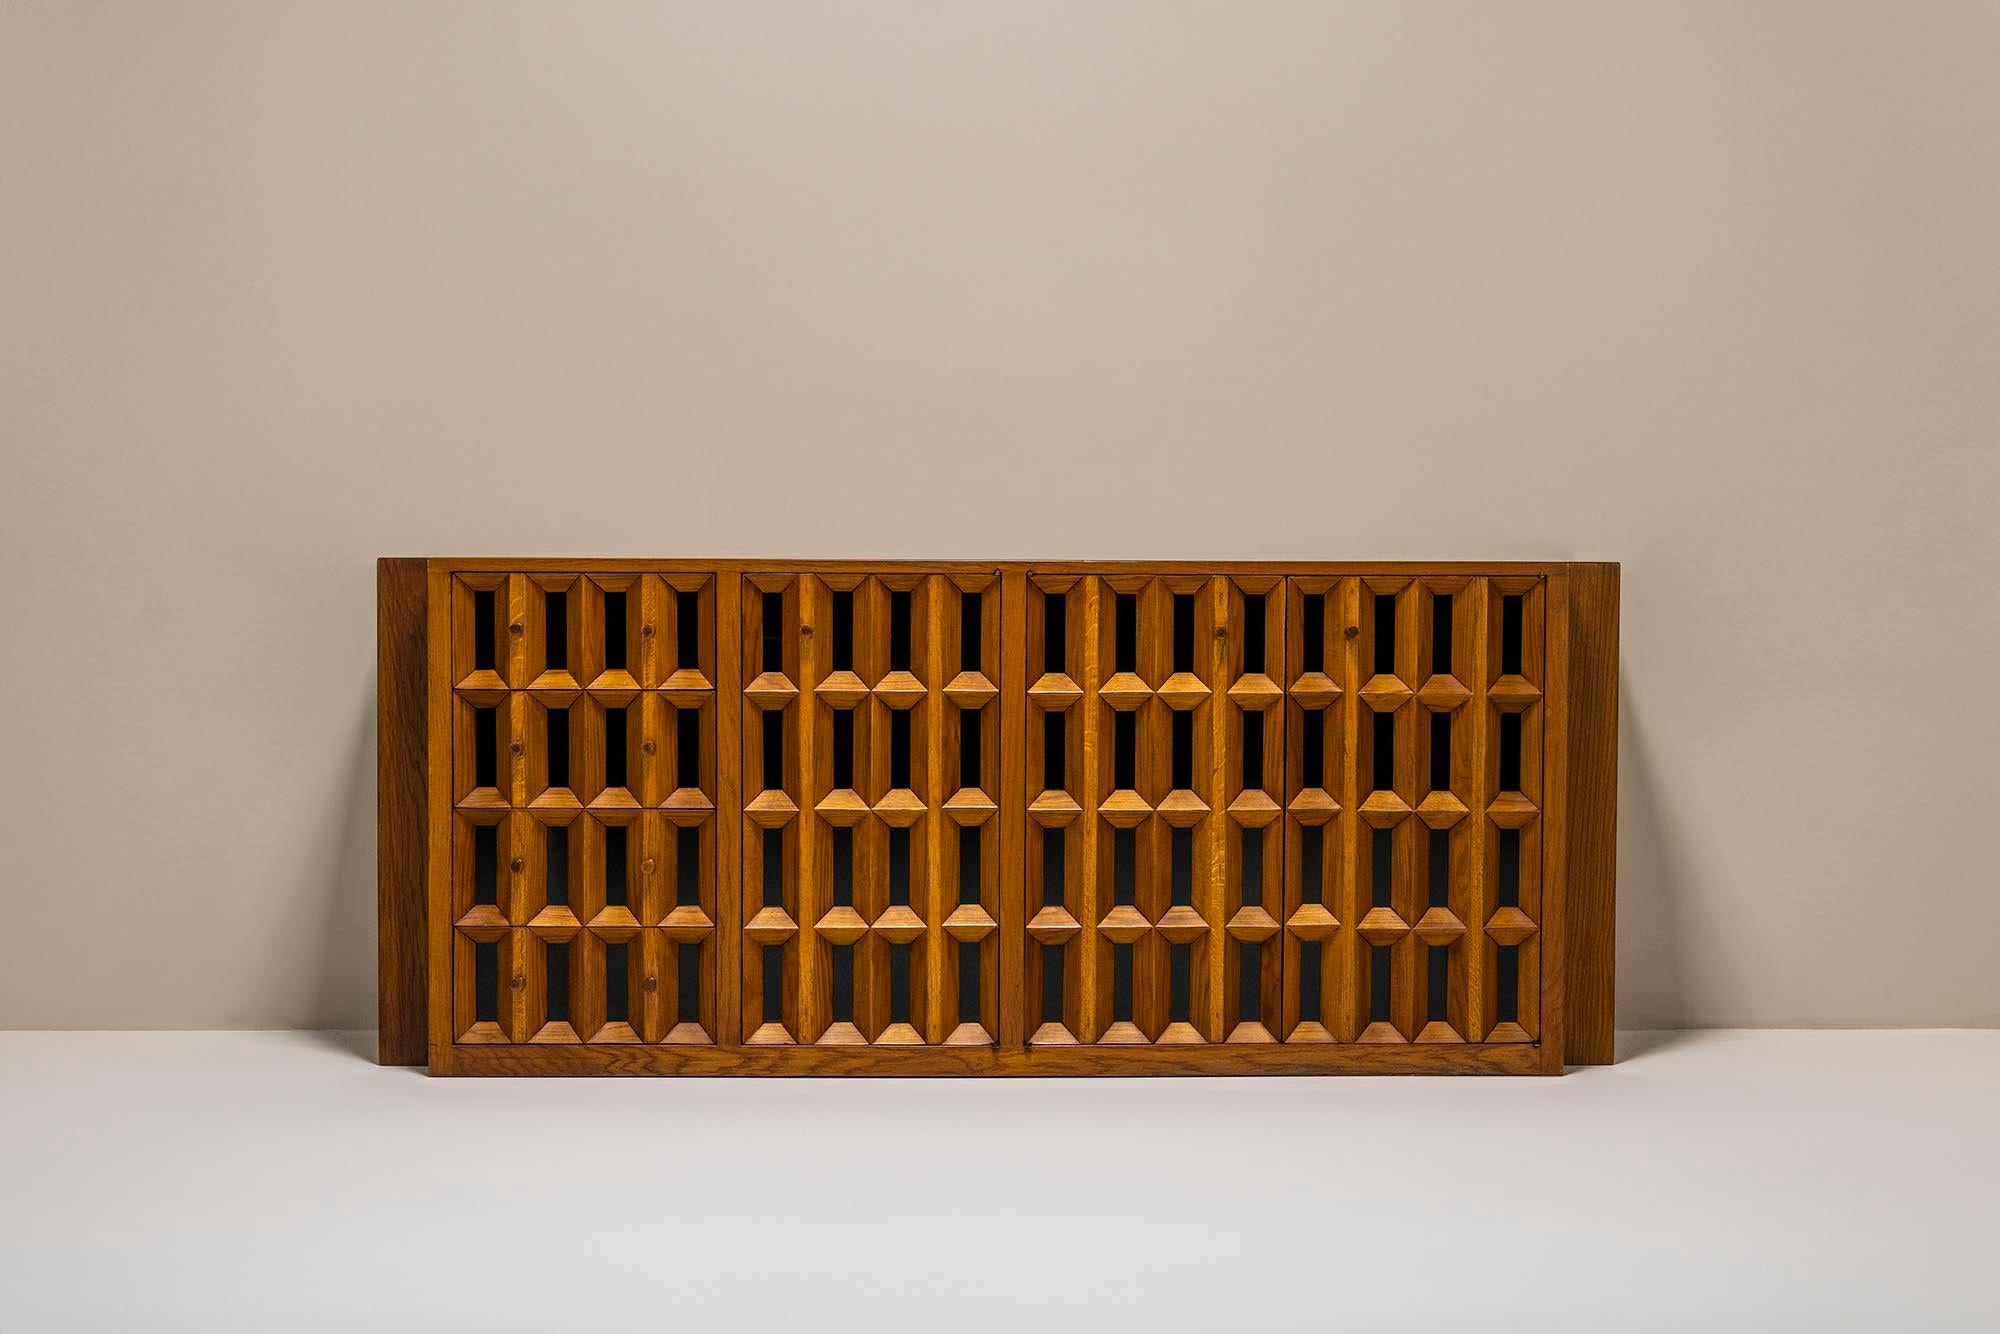 A high degree of elegance and refinement are words that immediately come to mind when gazing upon this sideboard. It is a masterpiece of craftsmanship that was made in the Brescian workshop of Giuseppe Rivadossi in the mid-1970s.

Design
The facade